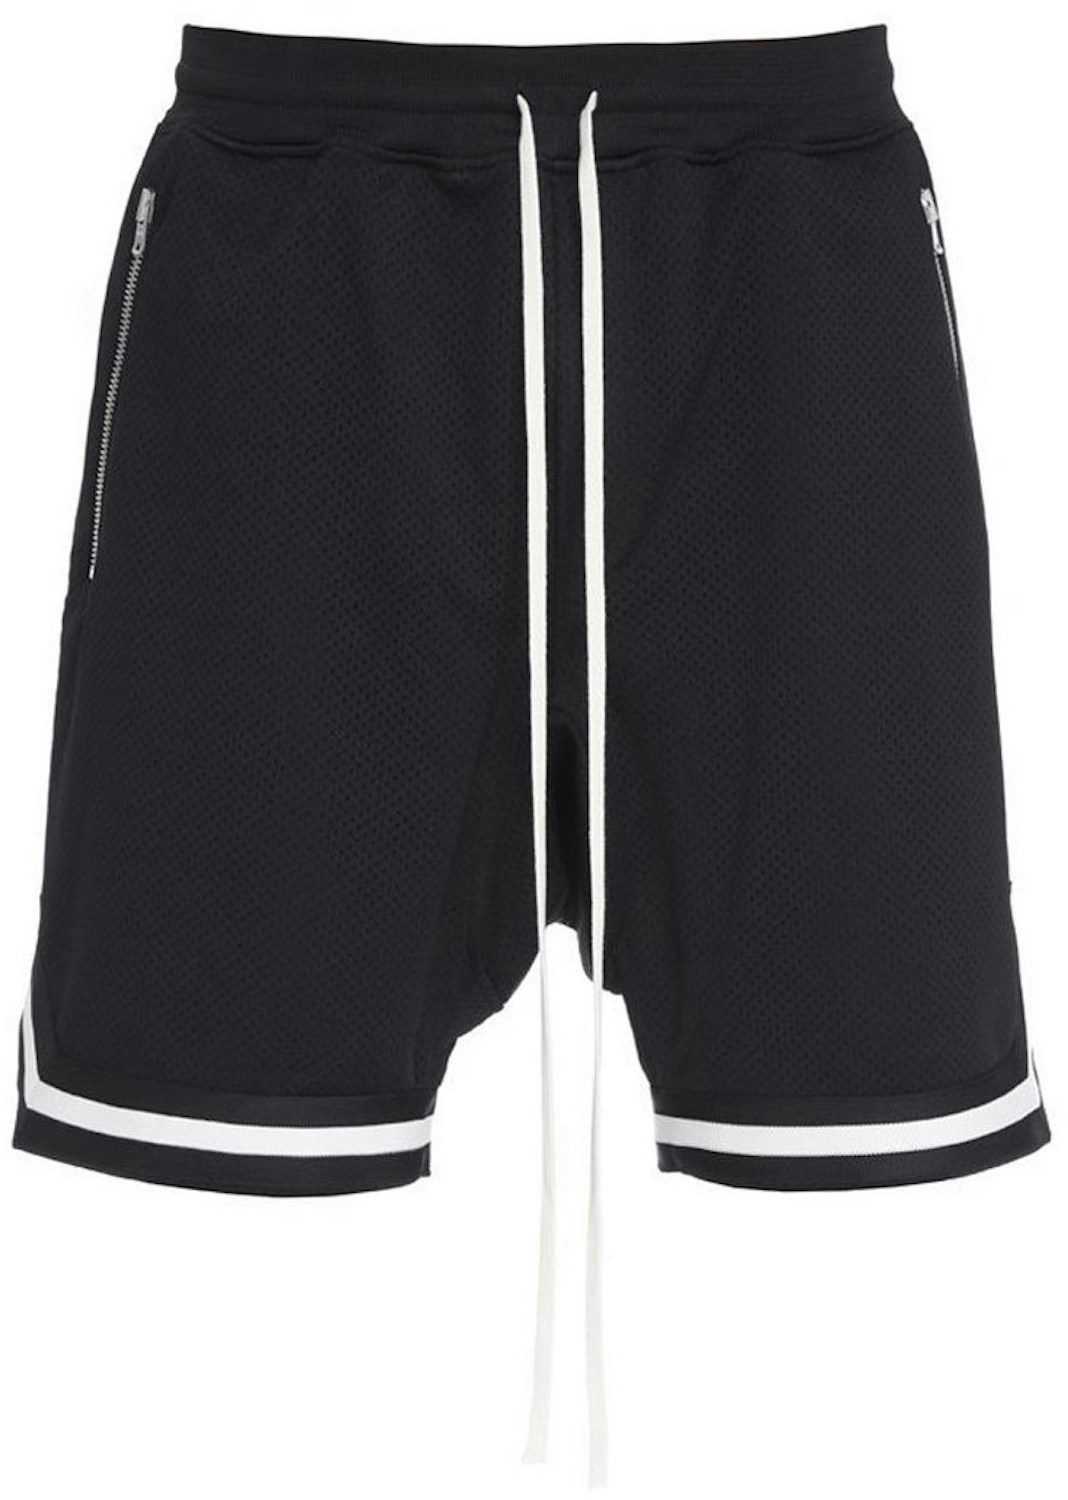 FEAR OF GOD Mesh Drop Shorts Black - Fifth Collection